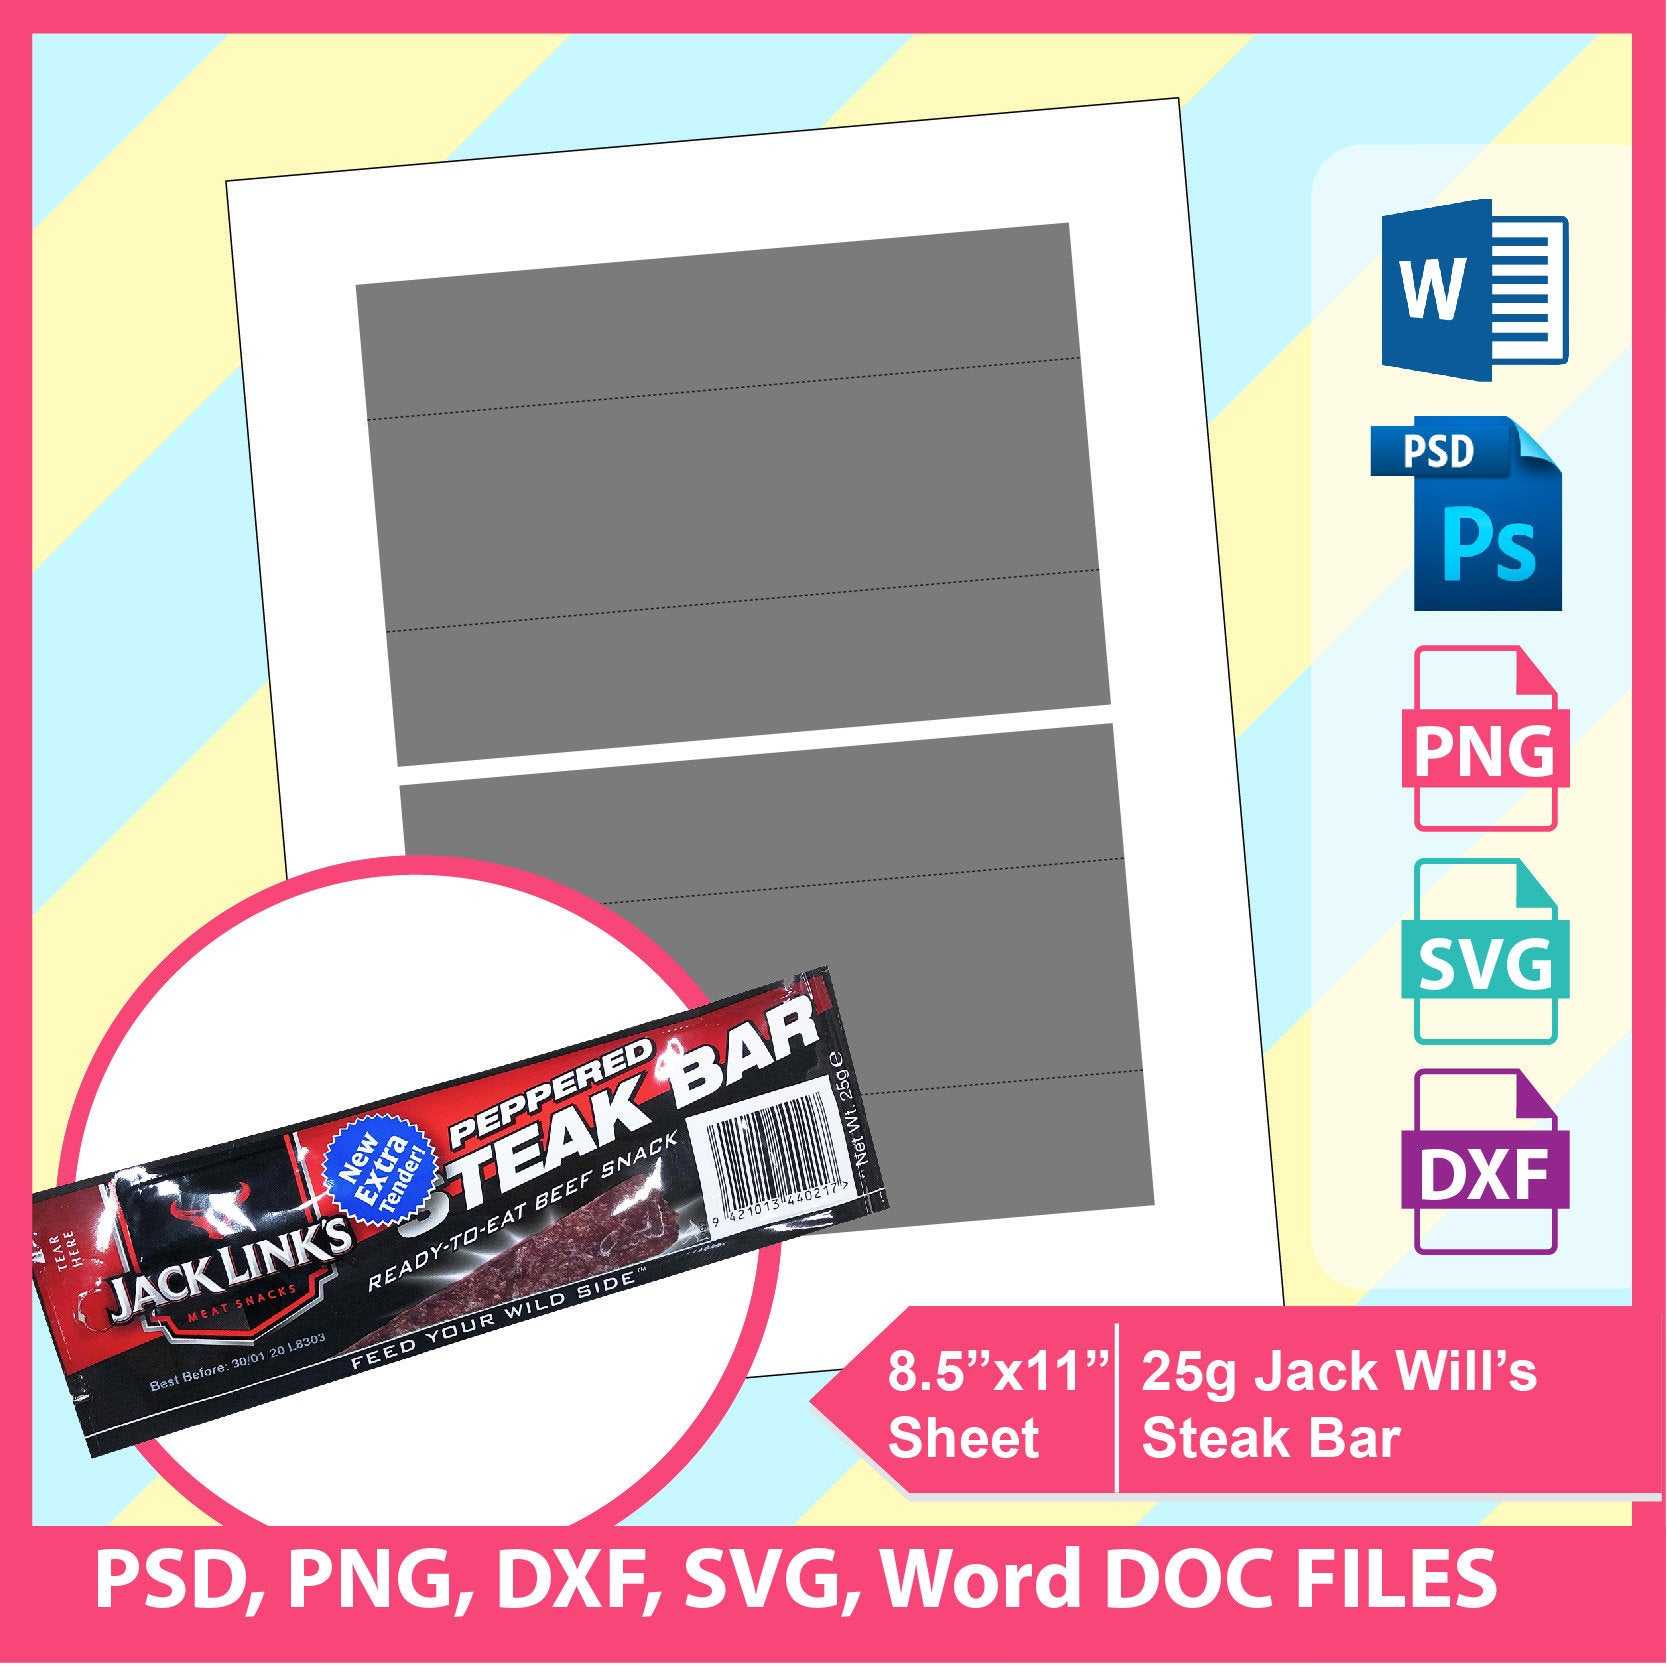 Jack Link's Steak Bar Wrapper Template, Psd, Png And Svg, Dxf, Doc  Microsoft Word Formats, 8.5X11" Sheet, Printable 679 Pertaining To Blank Candy Bar Wrapper Template For Word